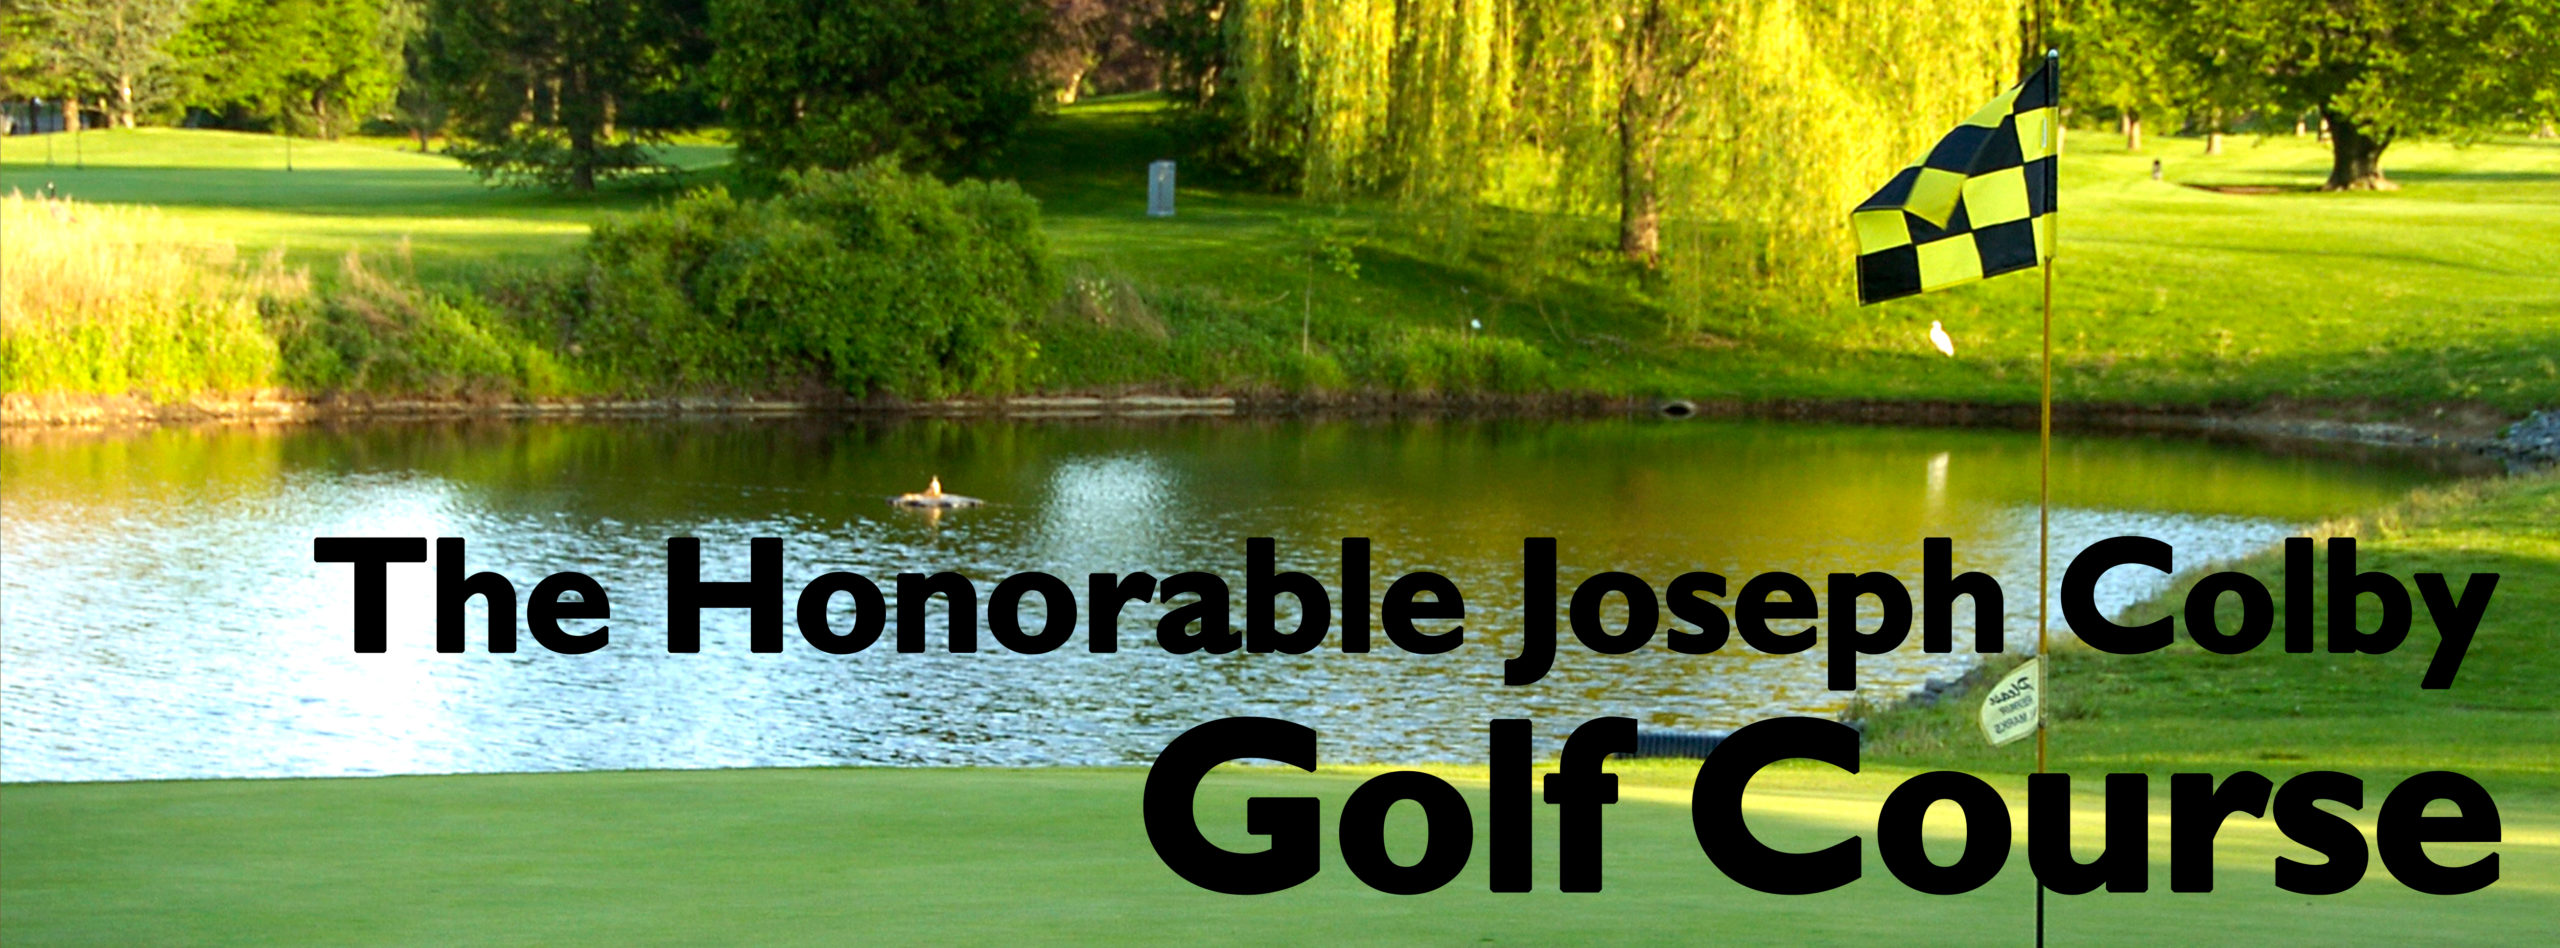 The Honorable Joseph Colby Town of Oyster Bay Golf Course ...